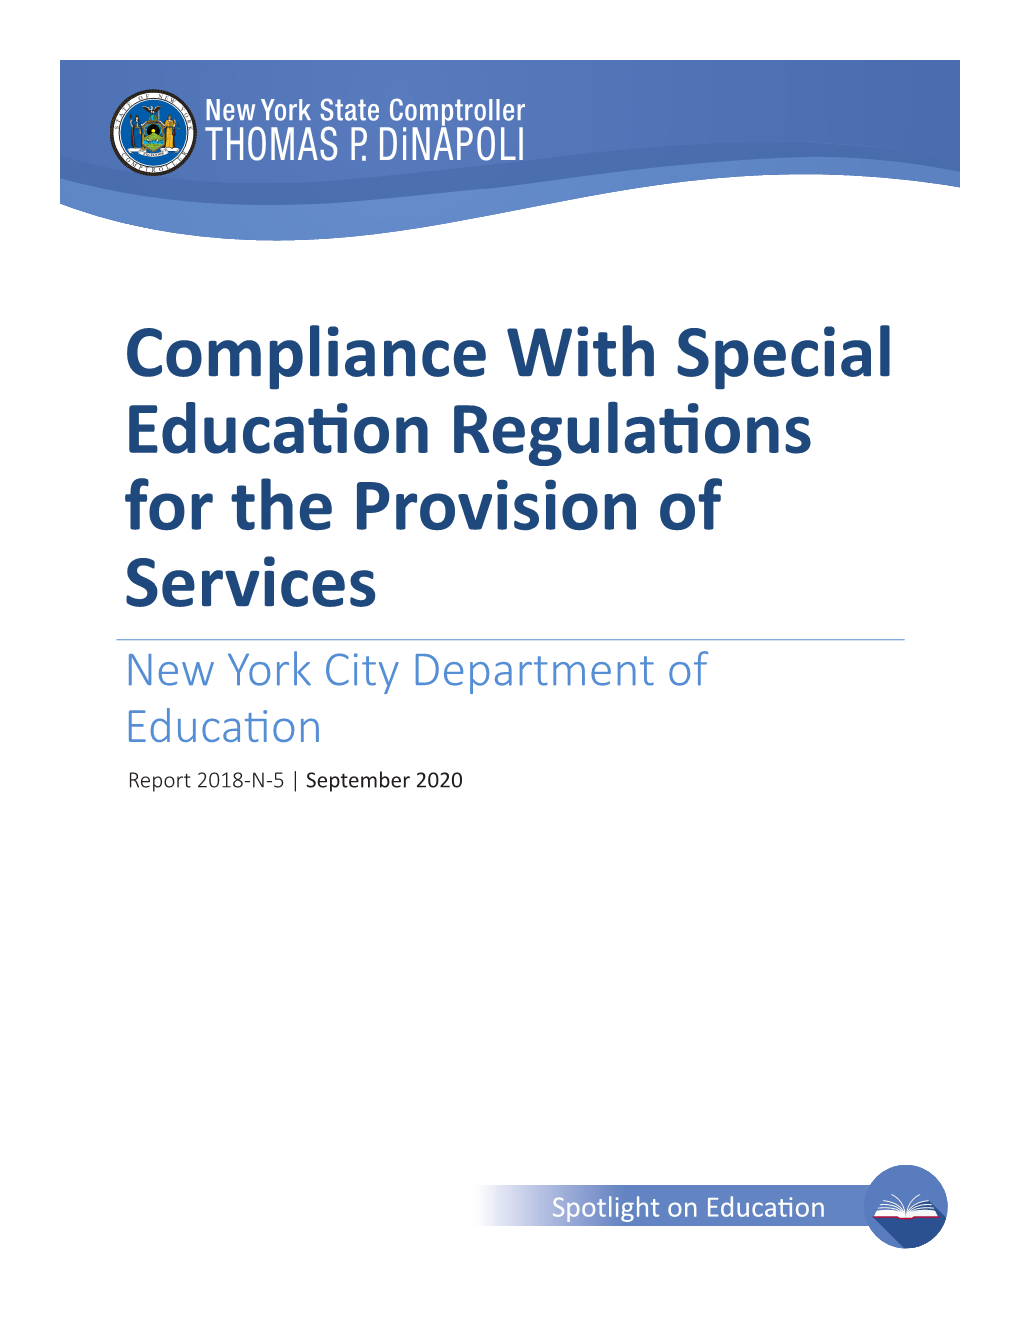 Compliance with Special Education Regulations for the Provision of Services New York City Department of Education Report 2018-N-5 | September 2020